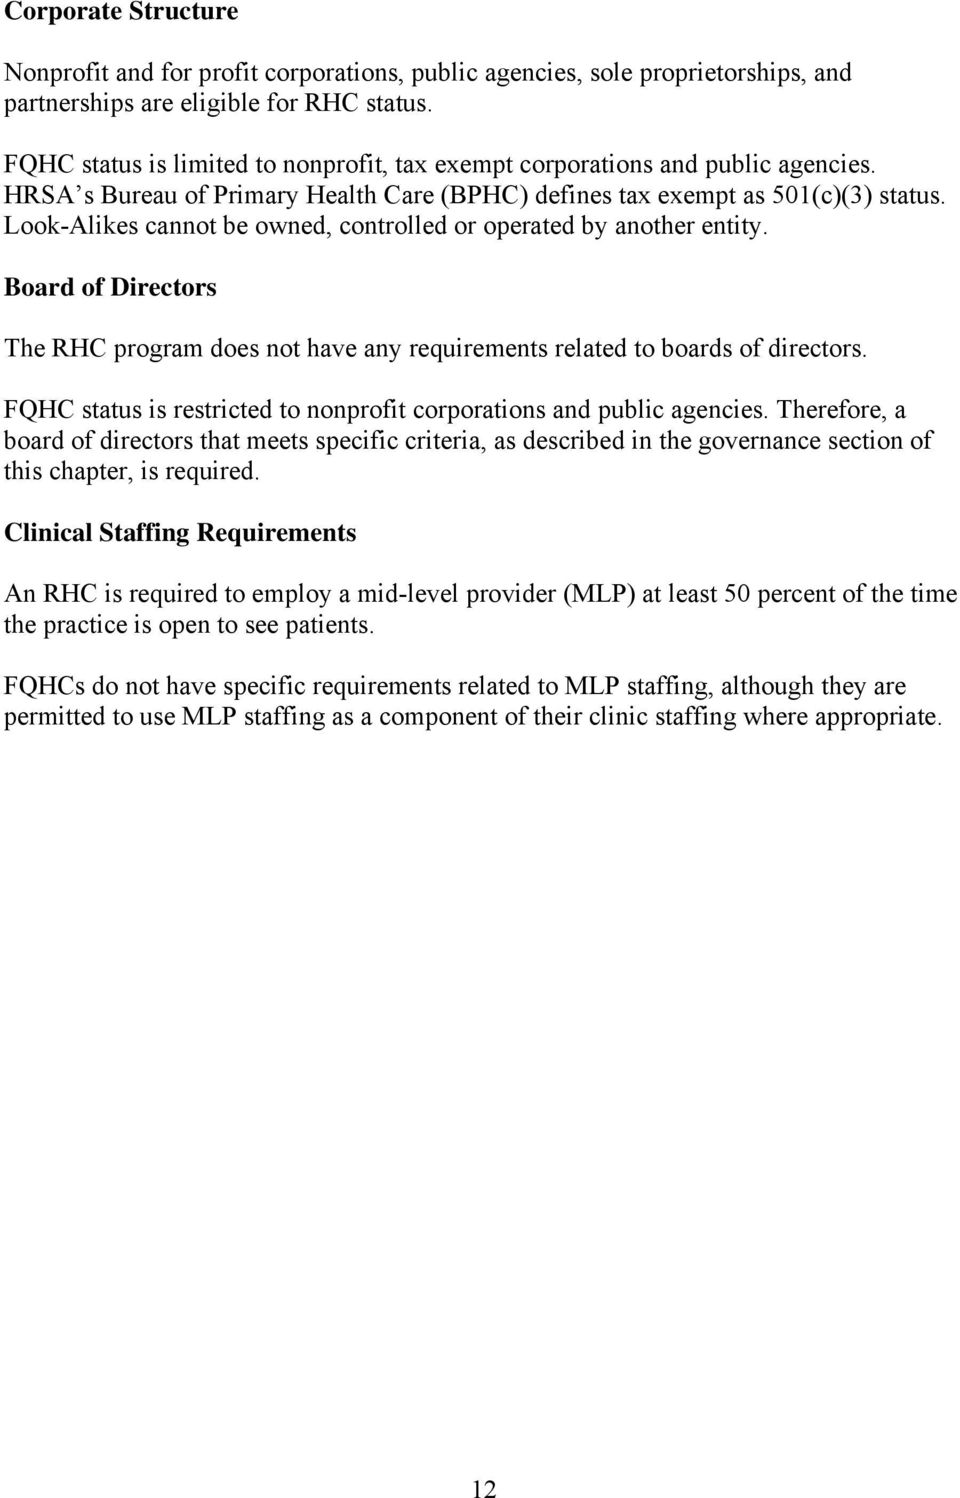 Look-Alikes cannot be owned, controlled or operated by another entity. Board of Directors The RHC program does not have any requirements related to boards of directors.